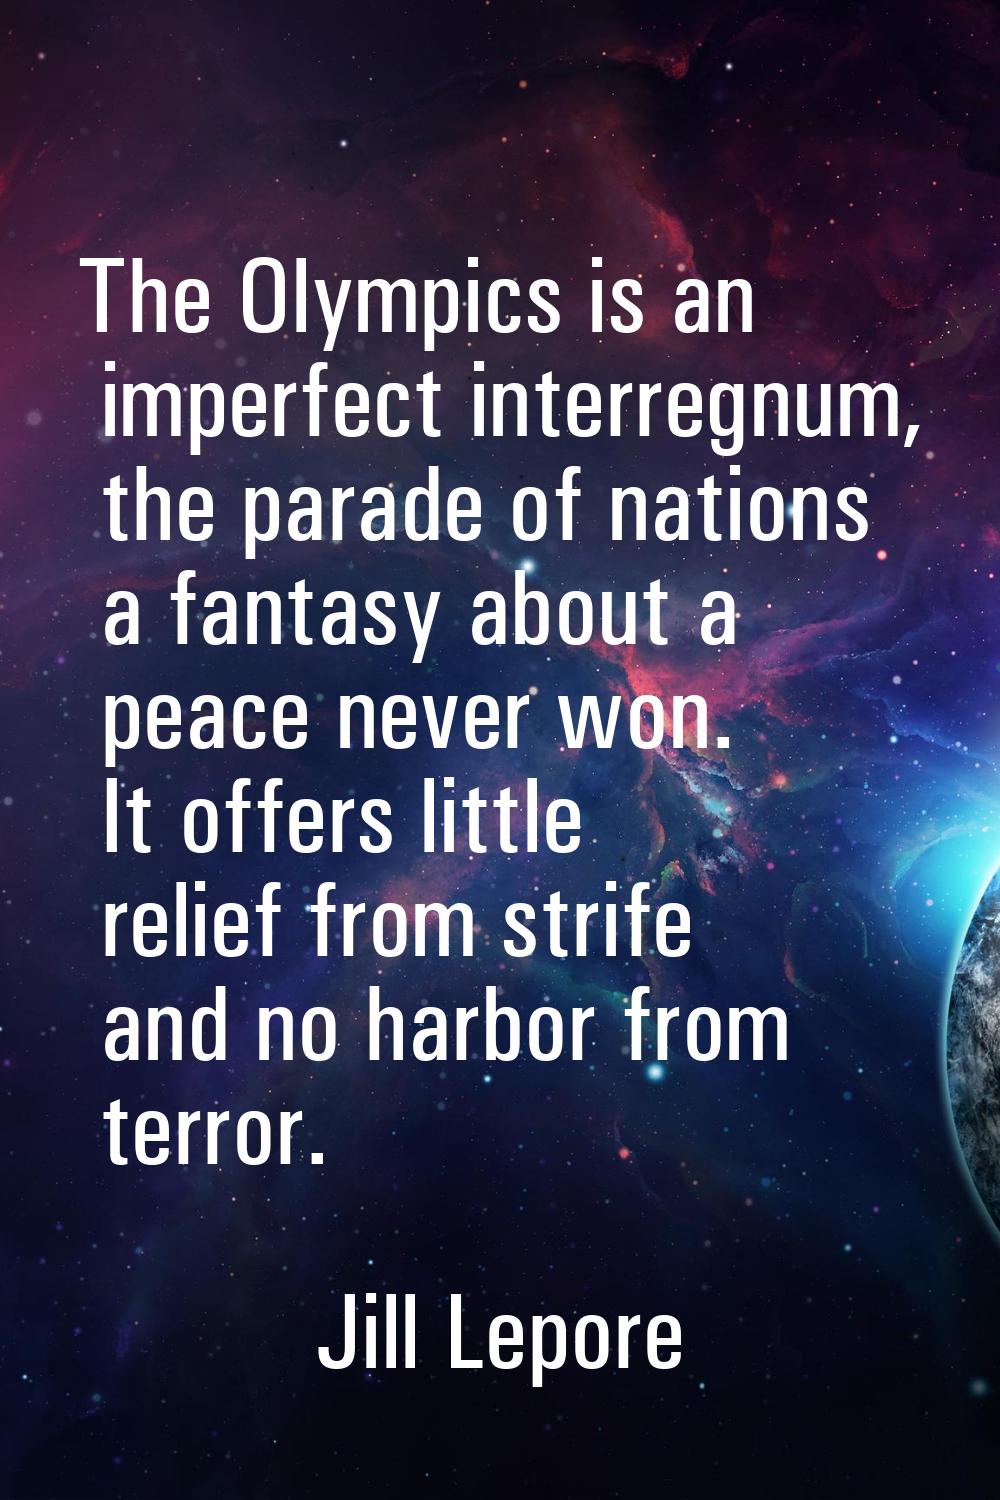 The Olympics is an imperfect interregnum, the parade of nations a fantasy about a peace never won. 